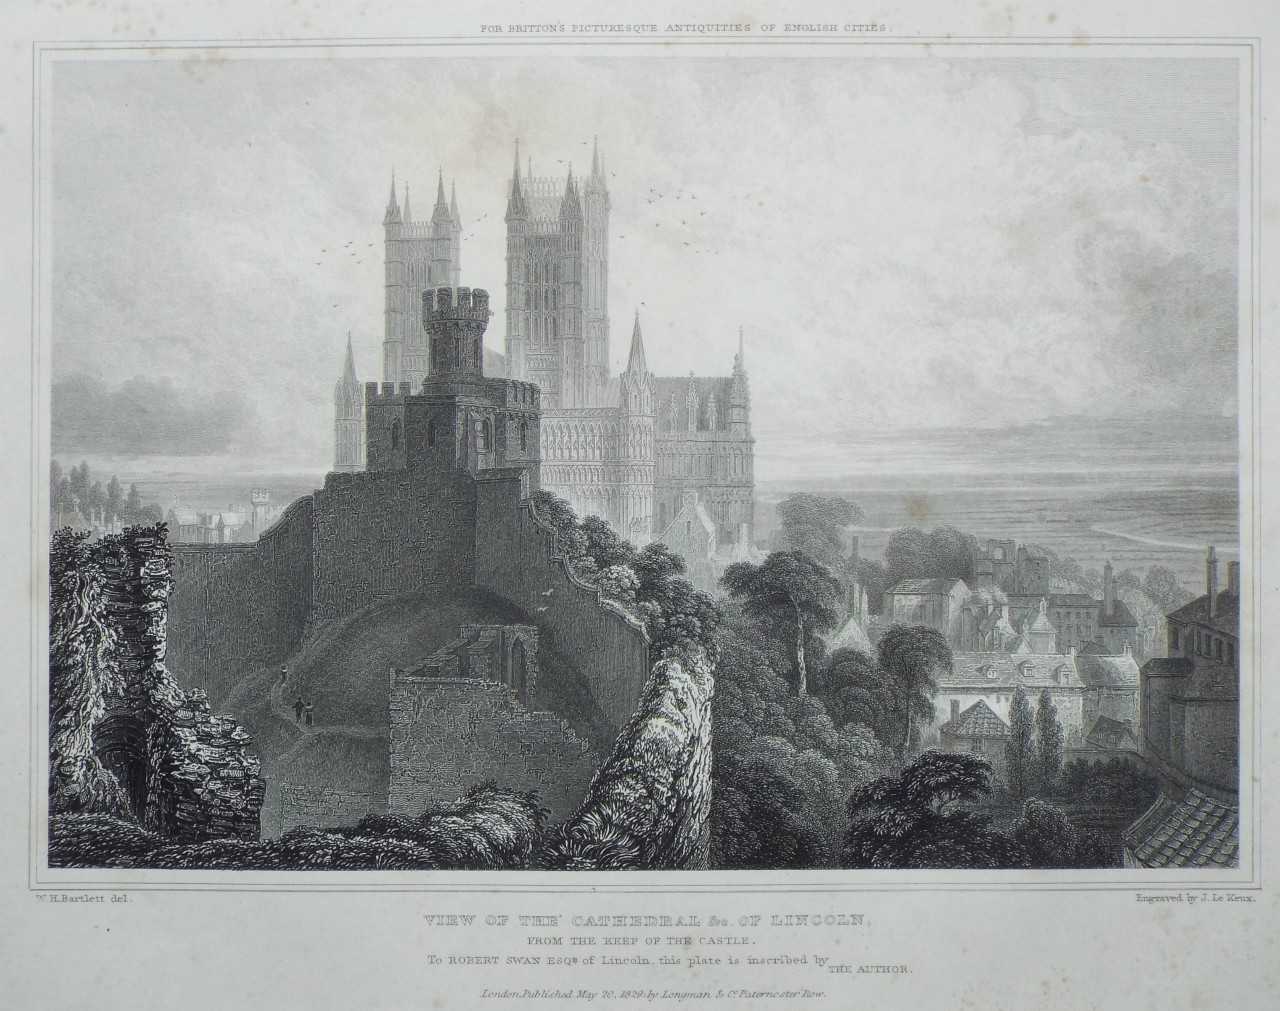 Print - View from the Cathedral &c. of Lincoln, from the Keep of the Castle. - Le